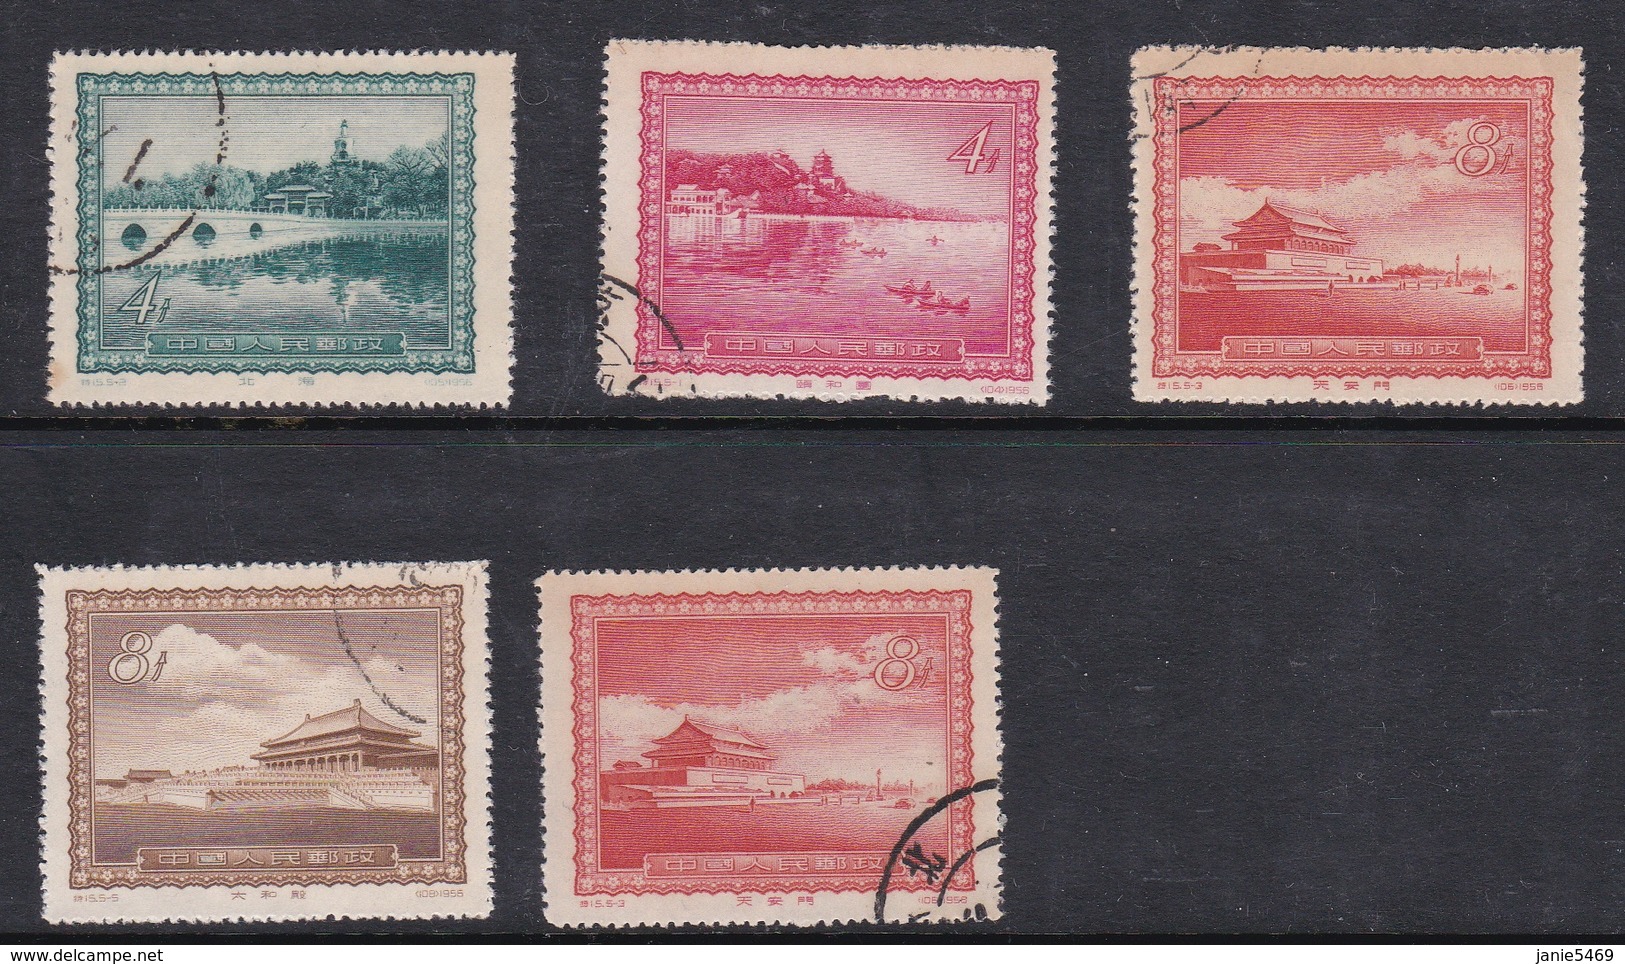 China People's Republic SG 1691-1695 1956 Peking Views, Used - Used Stamps